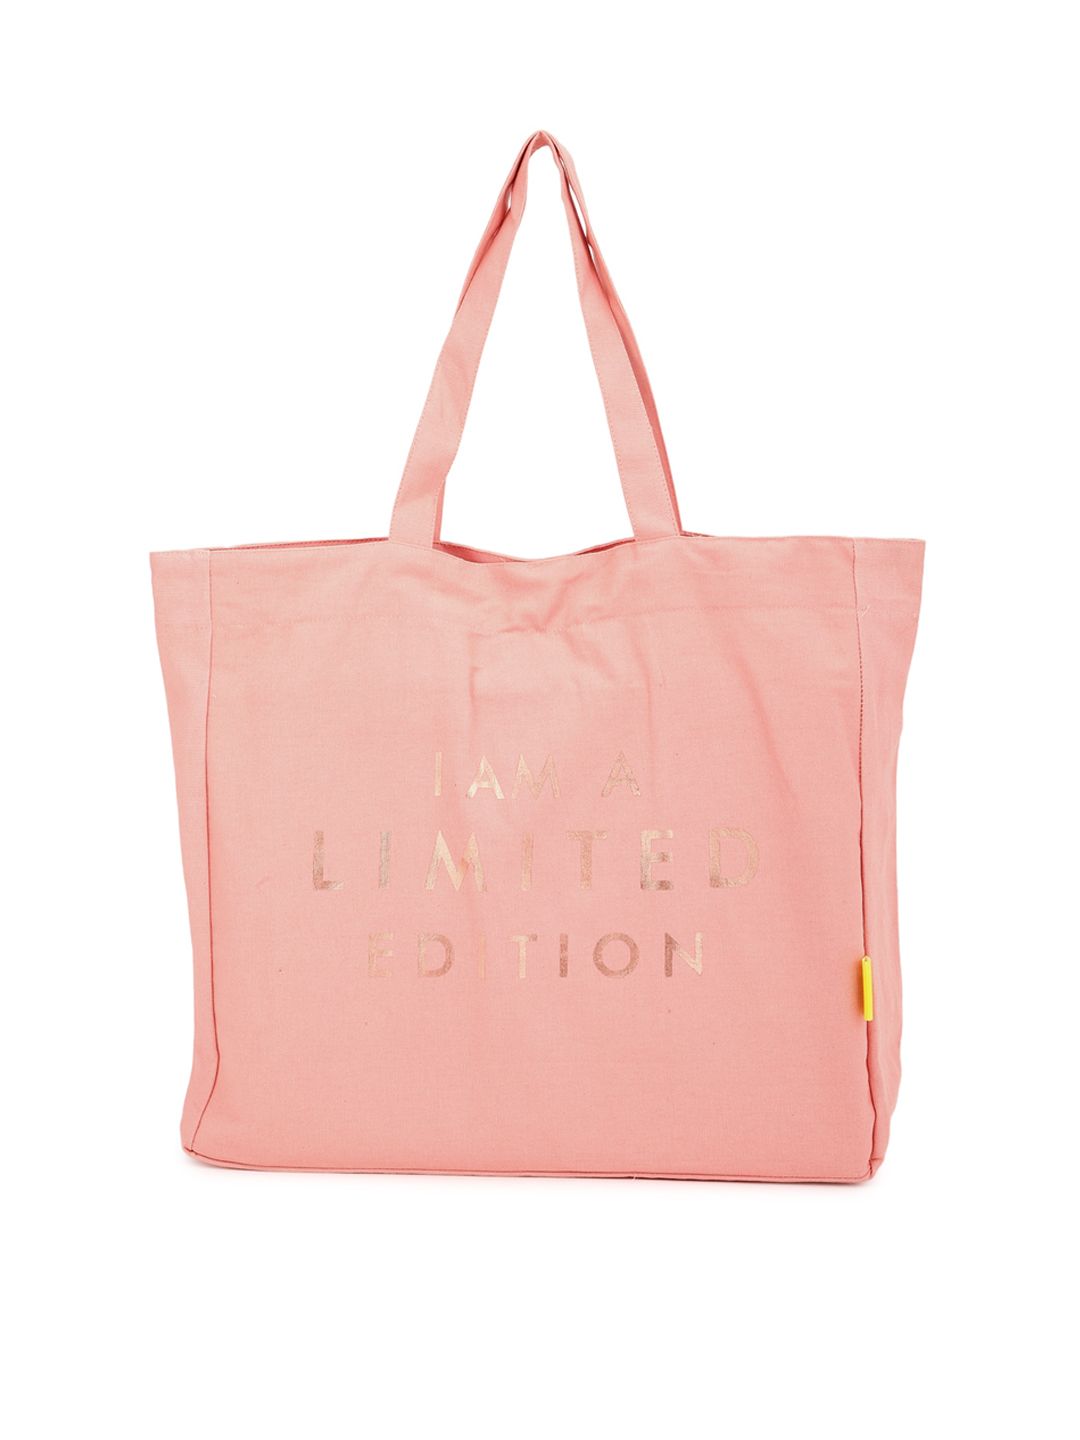 FOREVER 21 Pink Printed Oversized Shopper Tote Bag Price in India